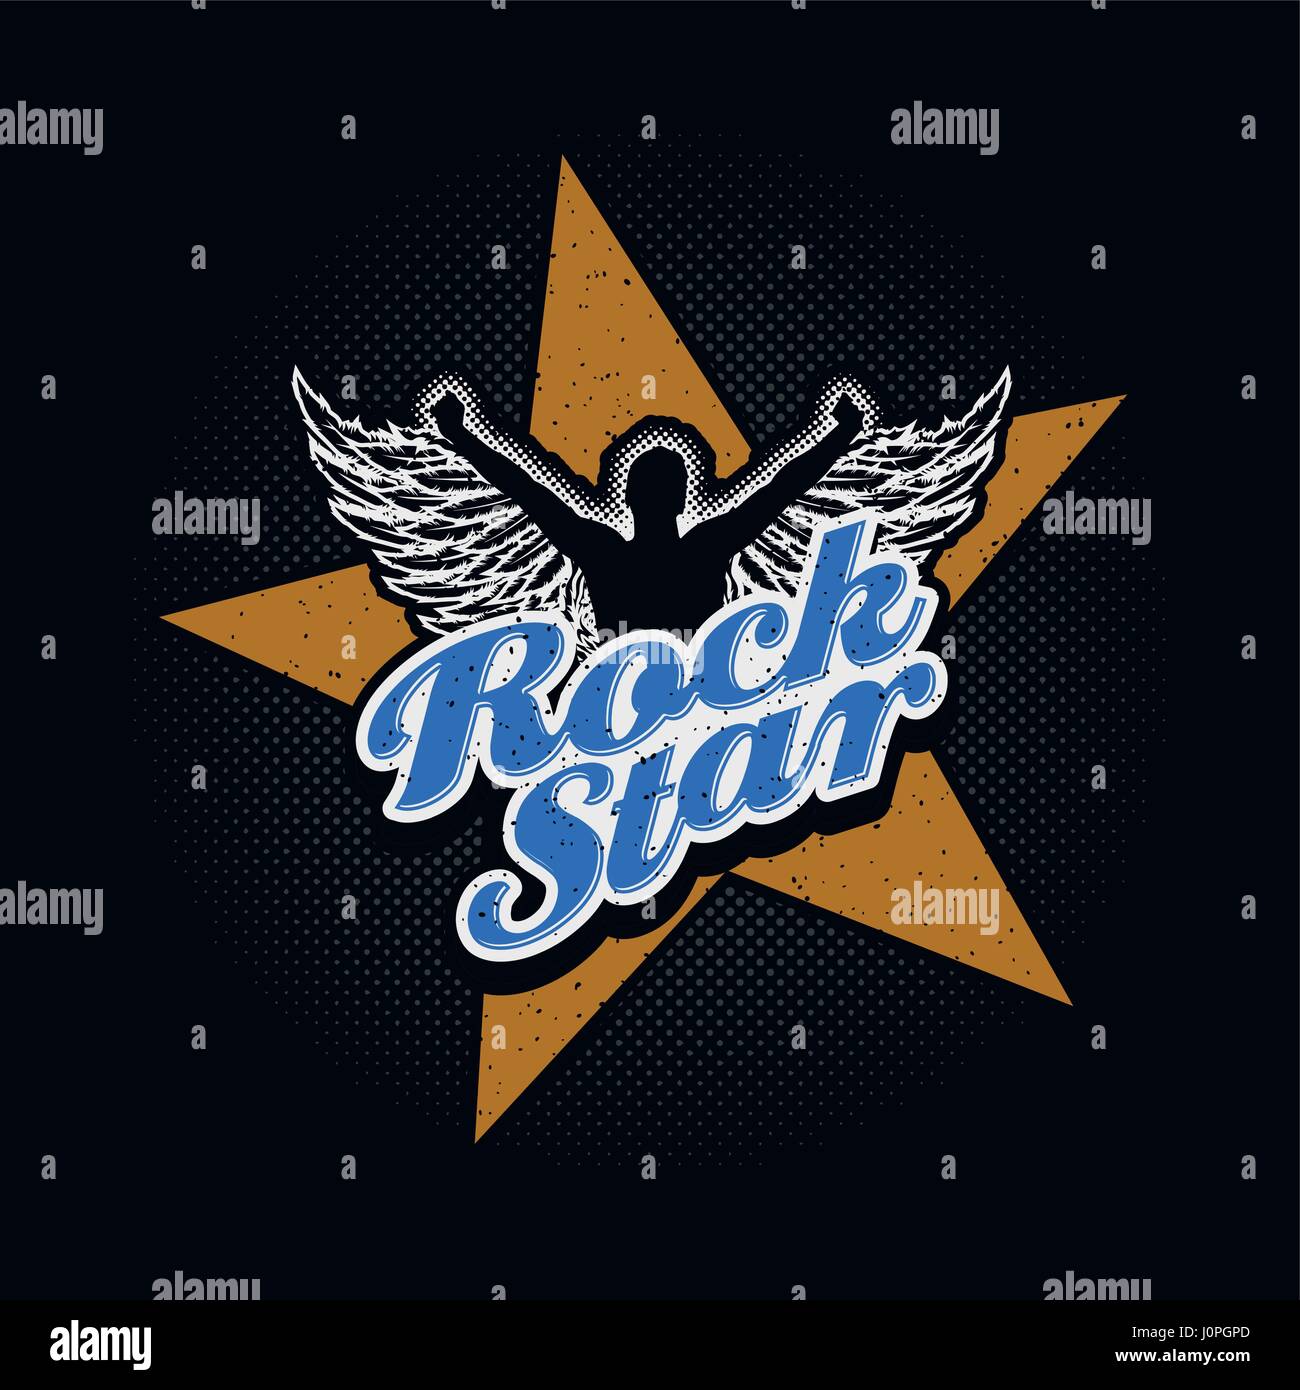 Rock Star typographic design for t-shirt print or all graphic designs. Global flat colors. Layered vector illustration. Stock Vector